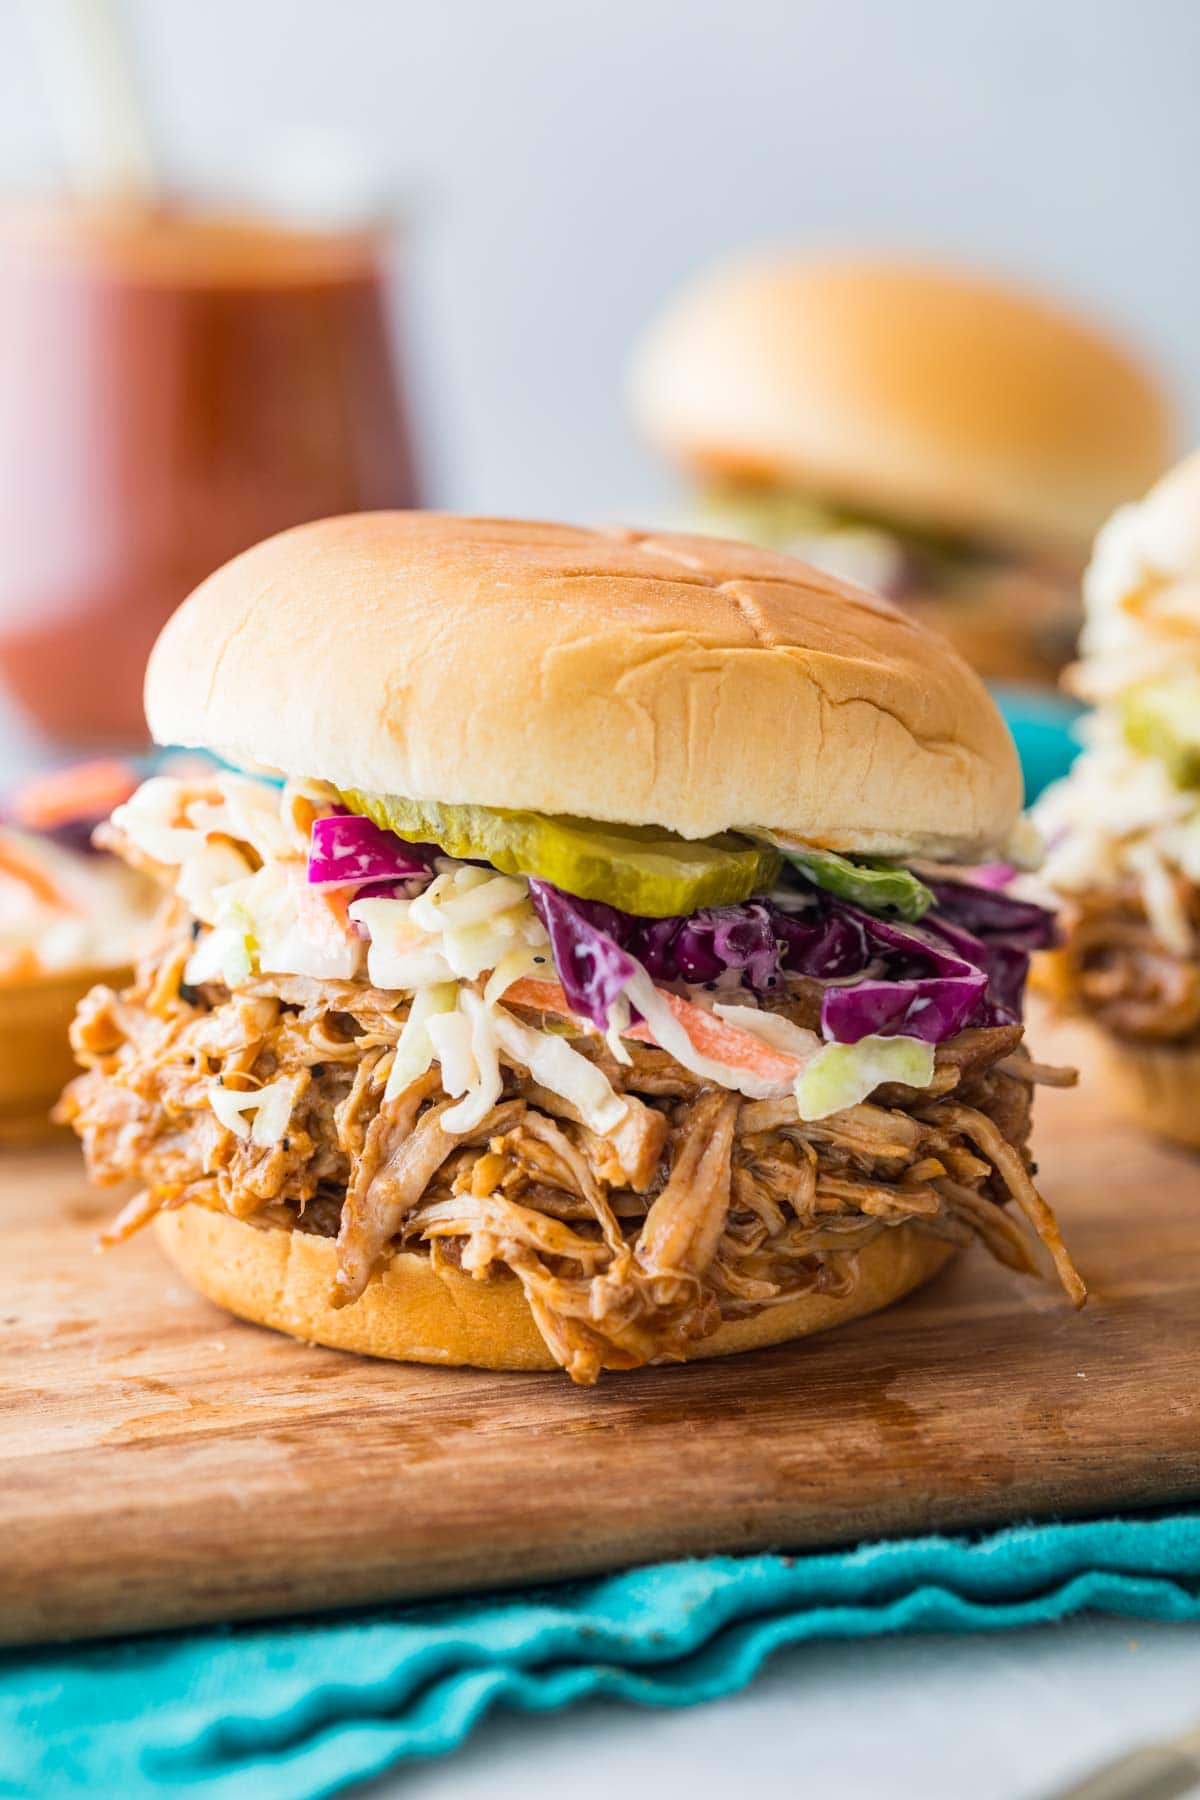 instant pot pulled pork on a sandwich topped with homemade coleslaw and pickles